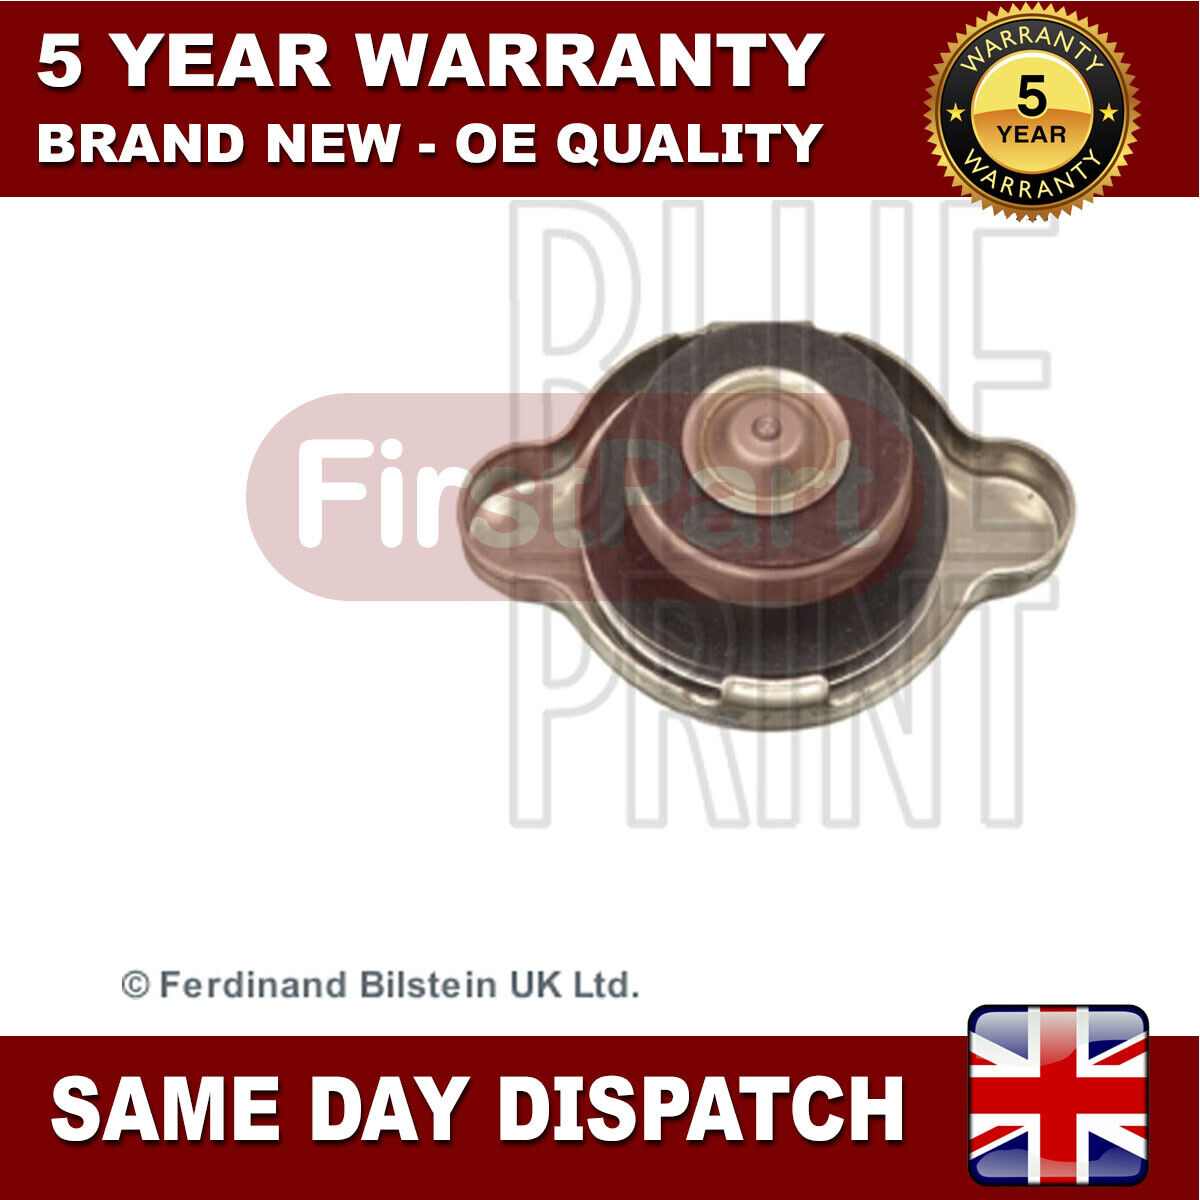 Fits Nissan Juke Micra Note Mazda RX-8 + Other Models FirstPart Radiator Cap